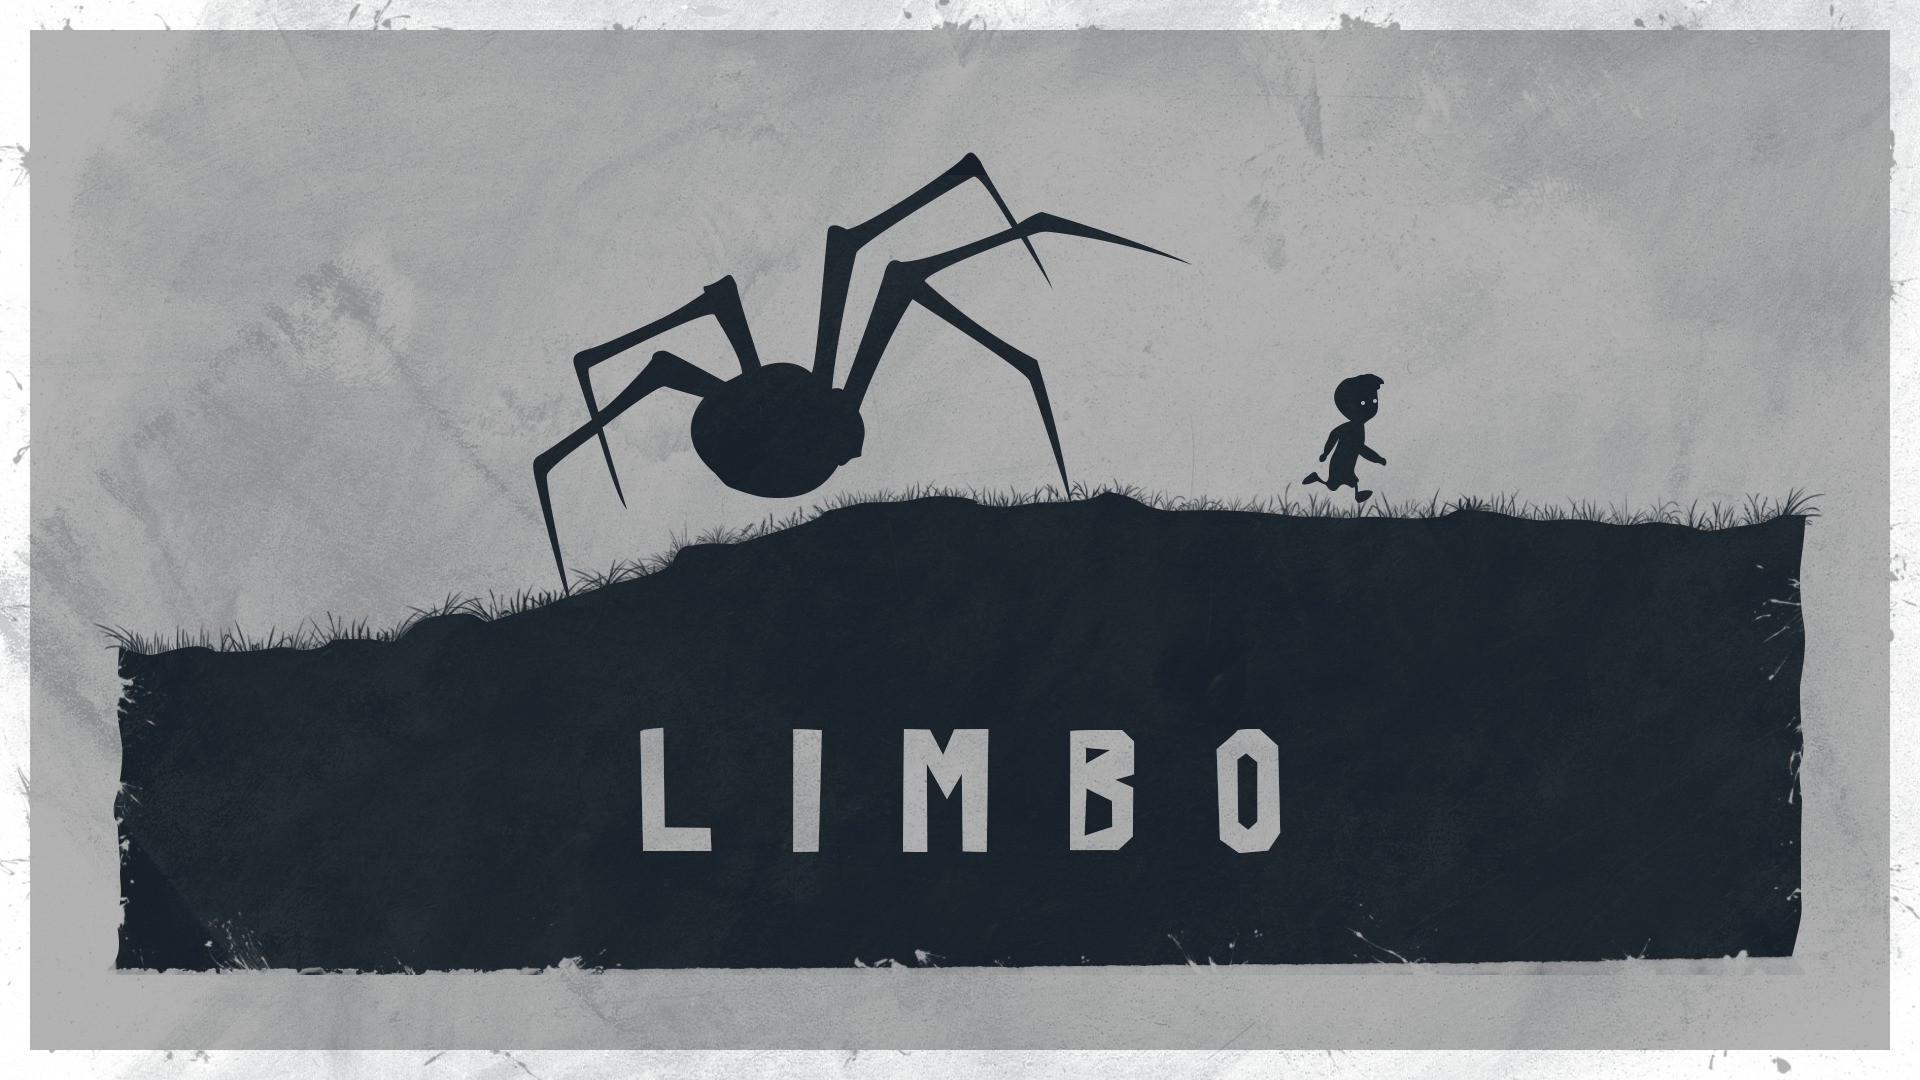 General 1920x1080 video games minimalism Limbo spider Playdead photoshopped PlayStation video game art gray gray background